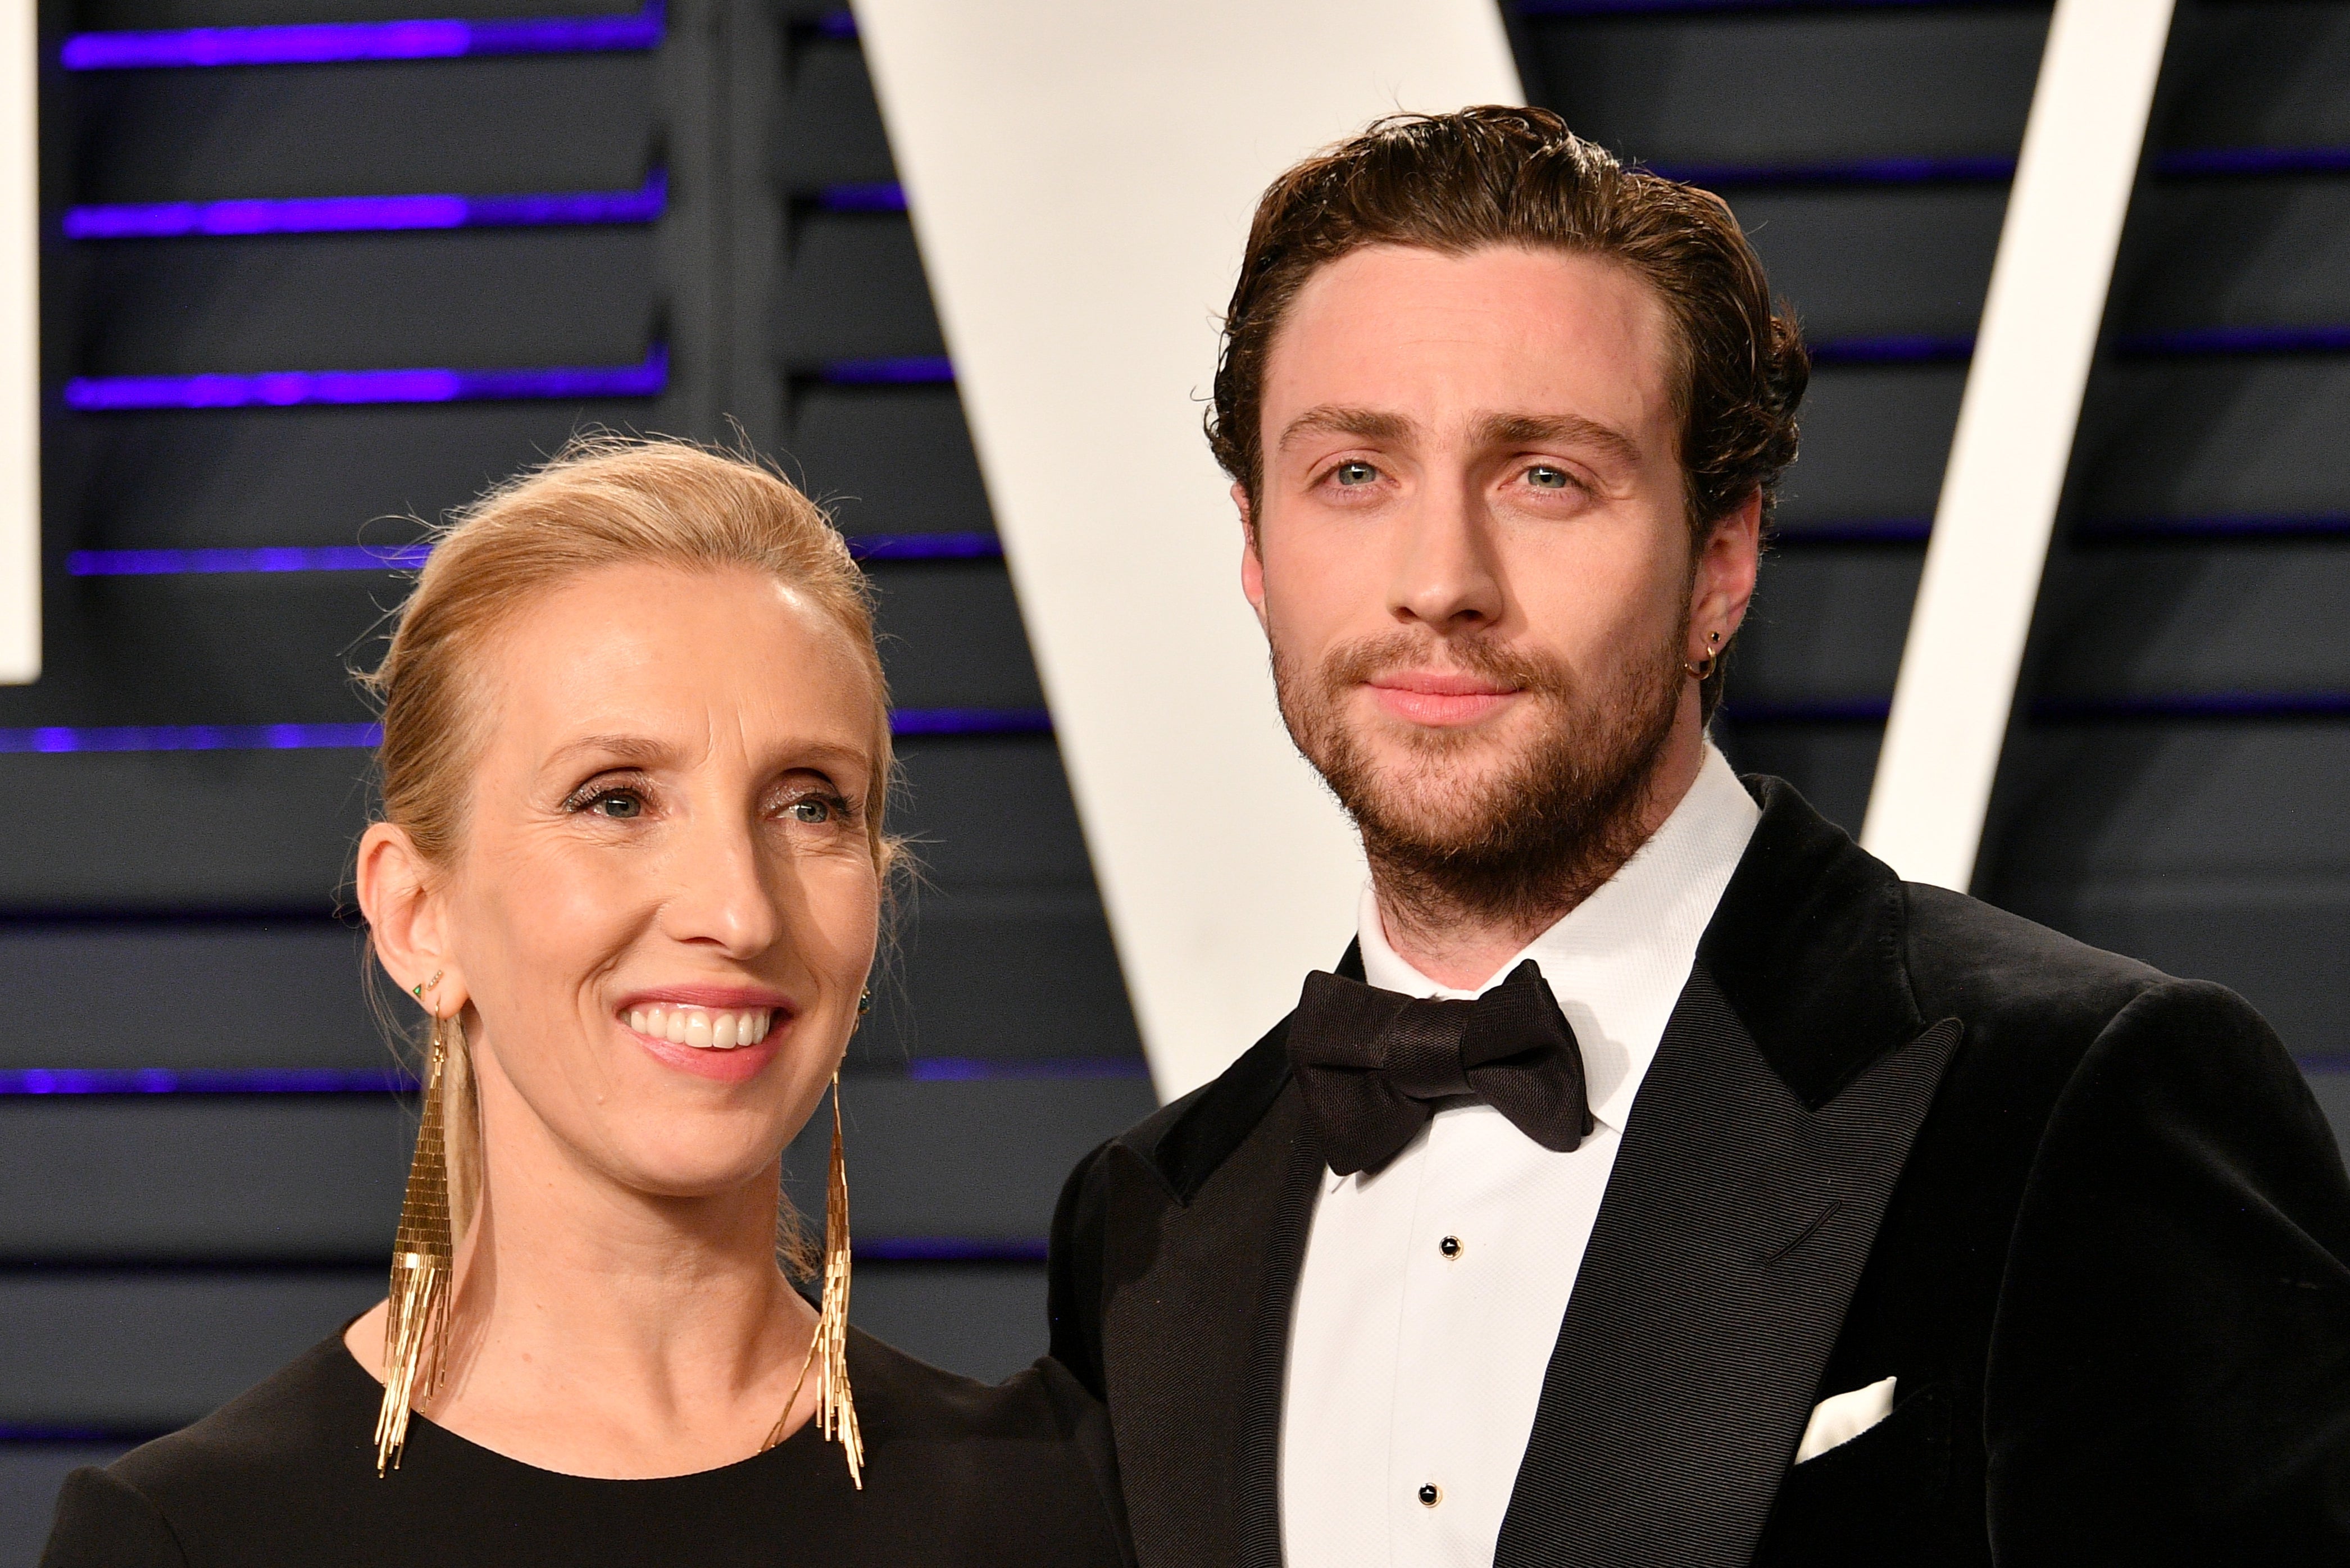 Sam and Aaron Taylor-Johnson attend the Vanity Fair Oscar Party in 2019